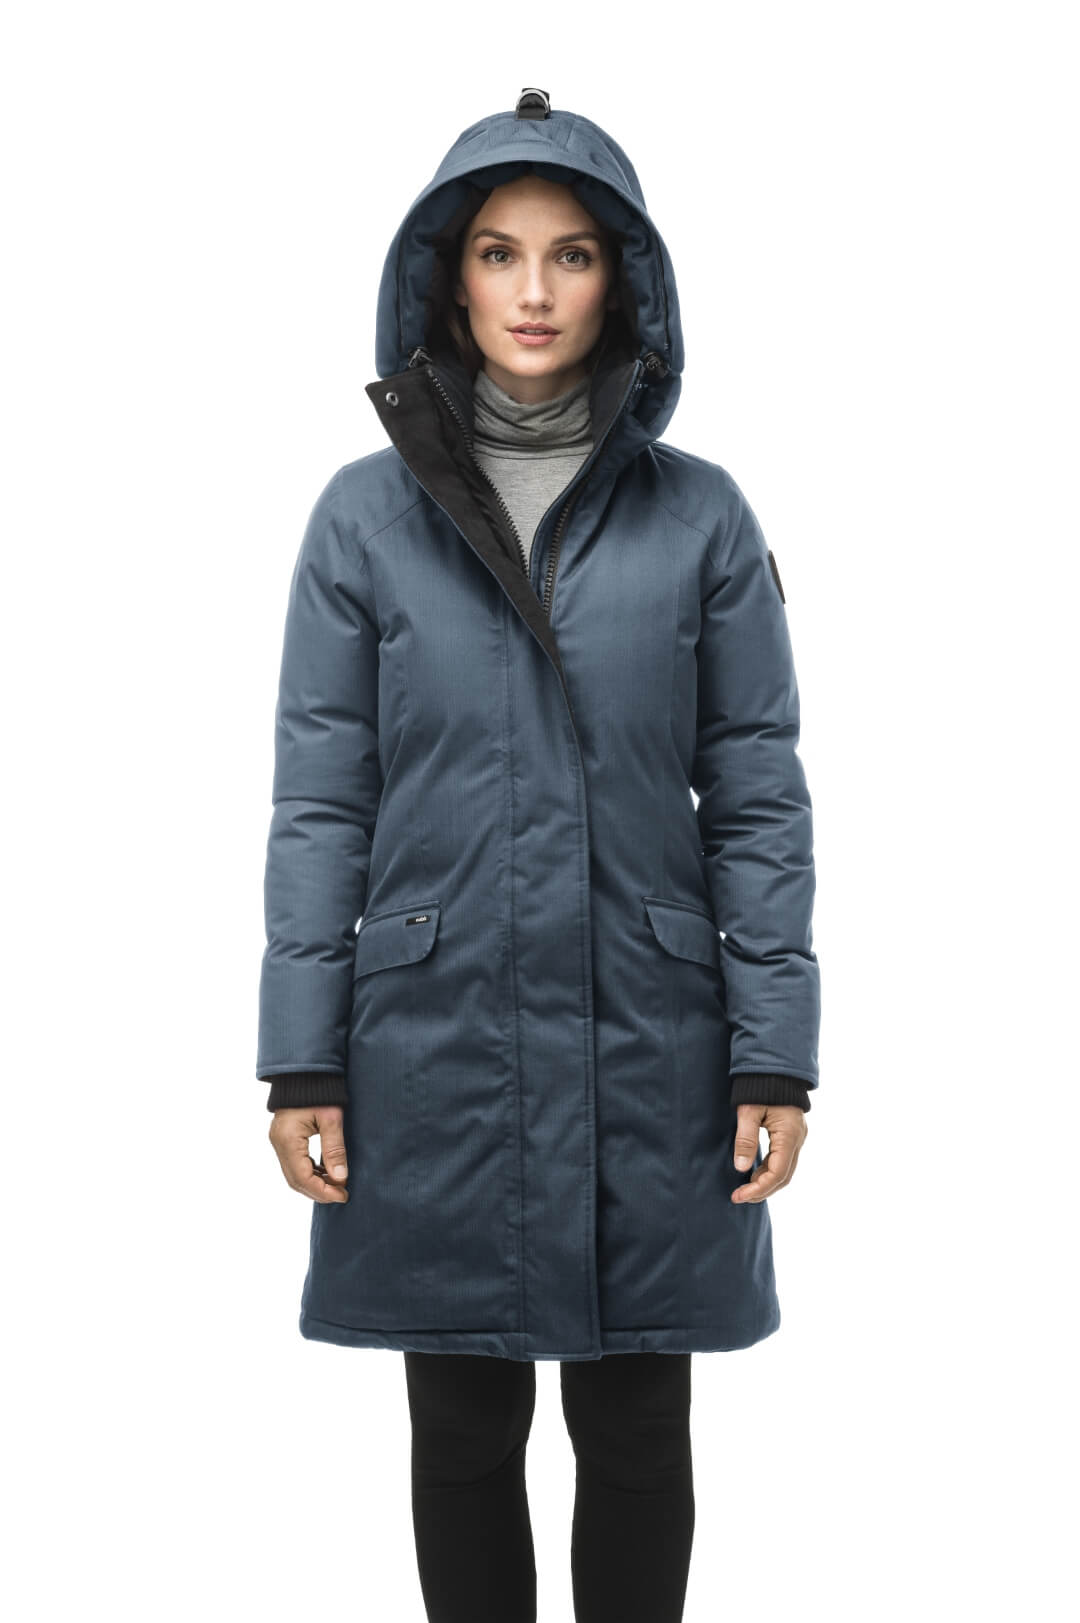 Rebecca Women's Parka in knee length, Canadian duck down insulation, two-way zipper with magnetic front placket, non-removable hood with removable coyote fur trim, in Balsam